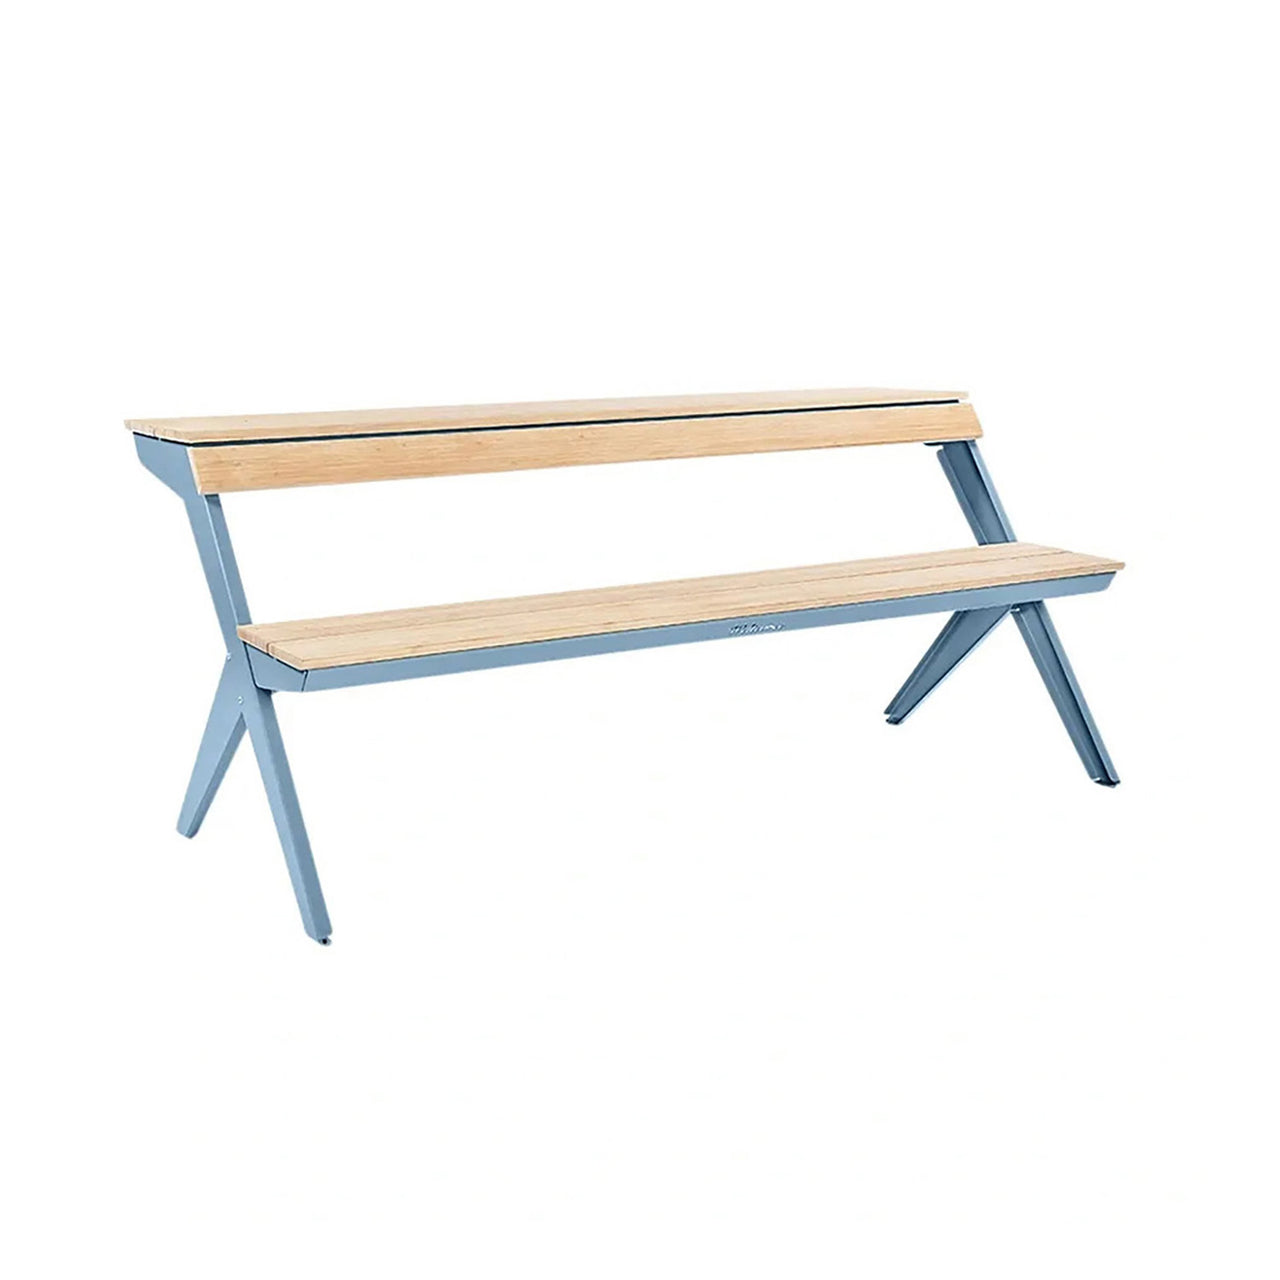 Tablebench: 3 Seater + Pastel Blue